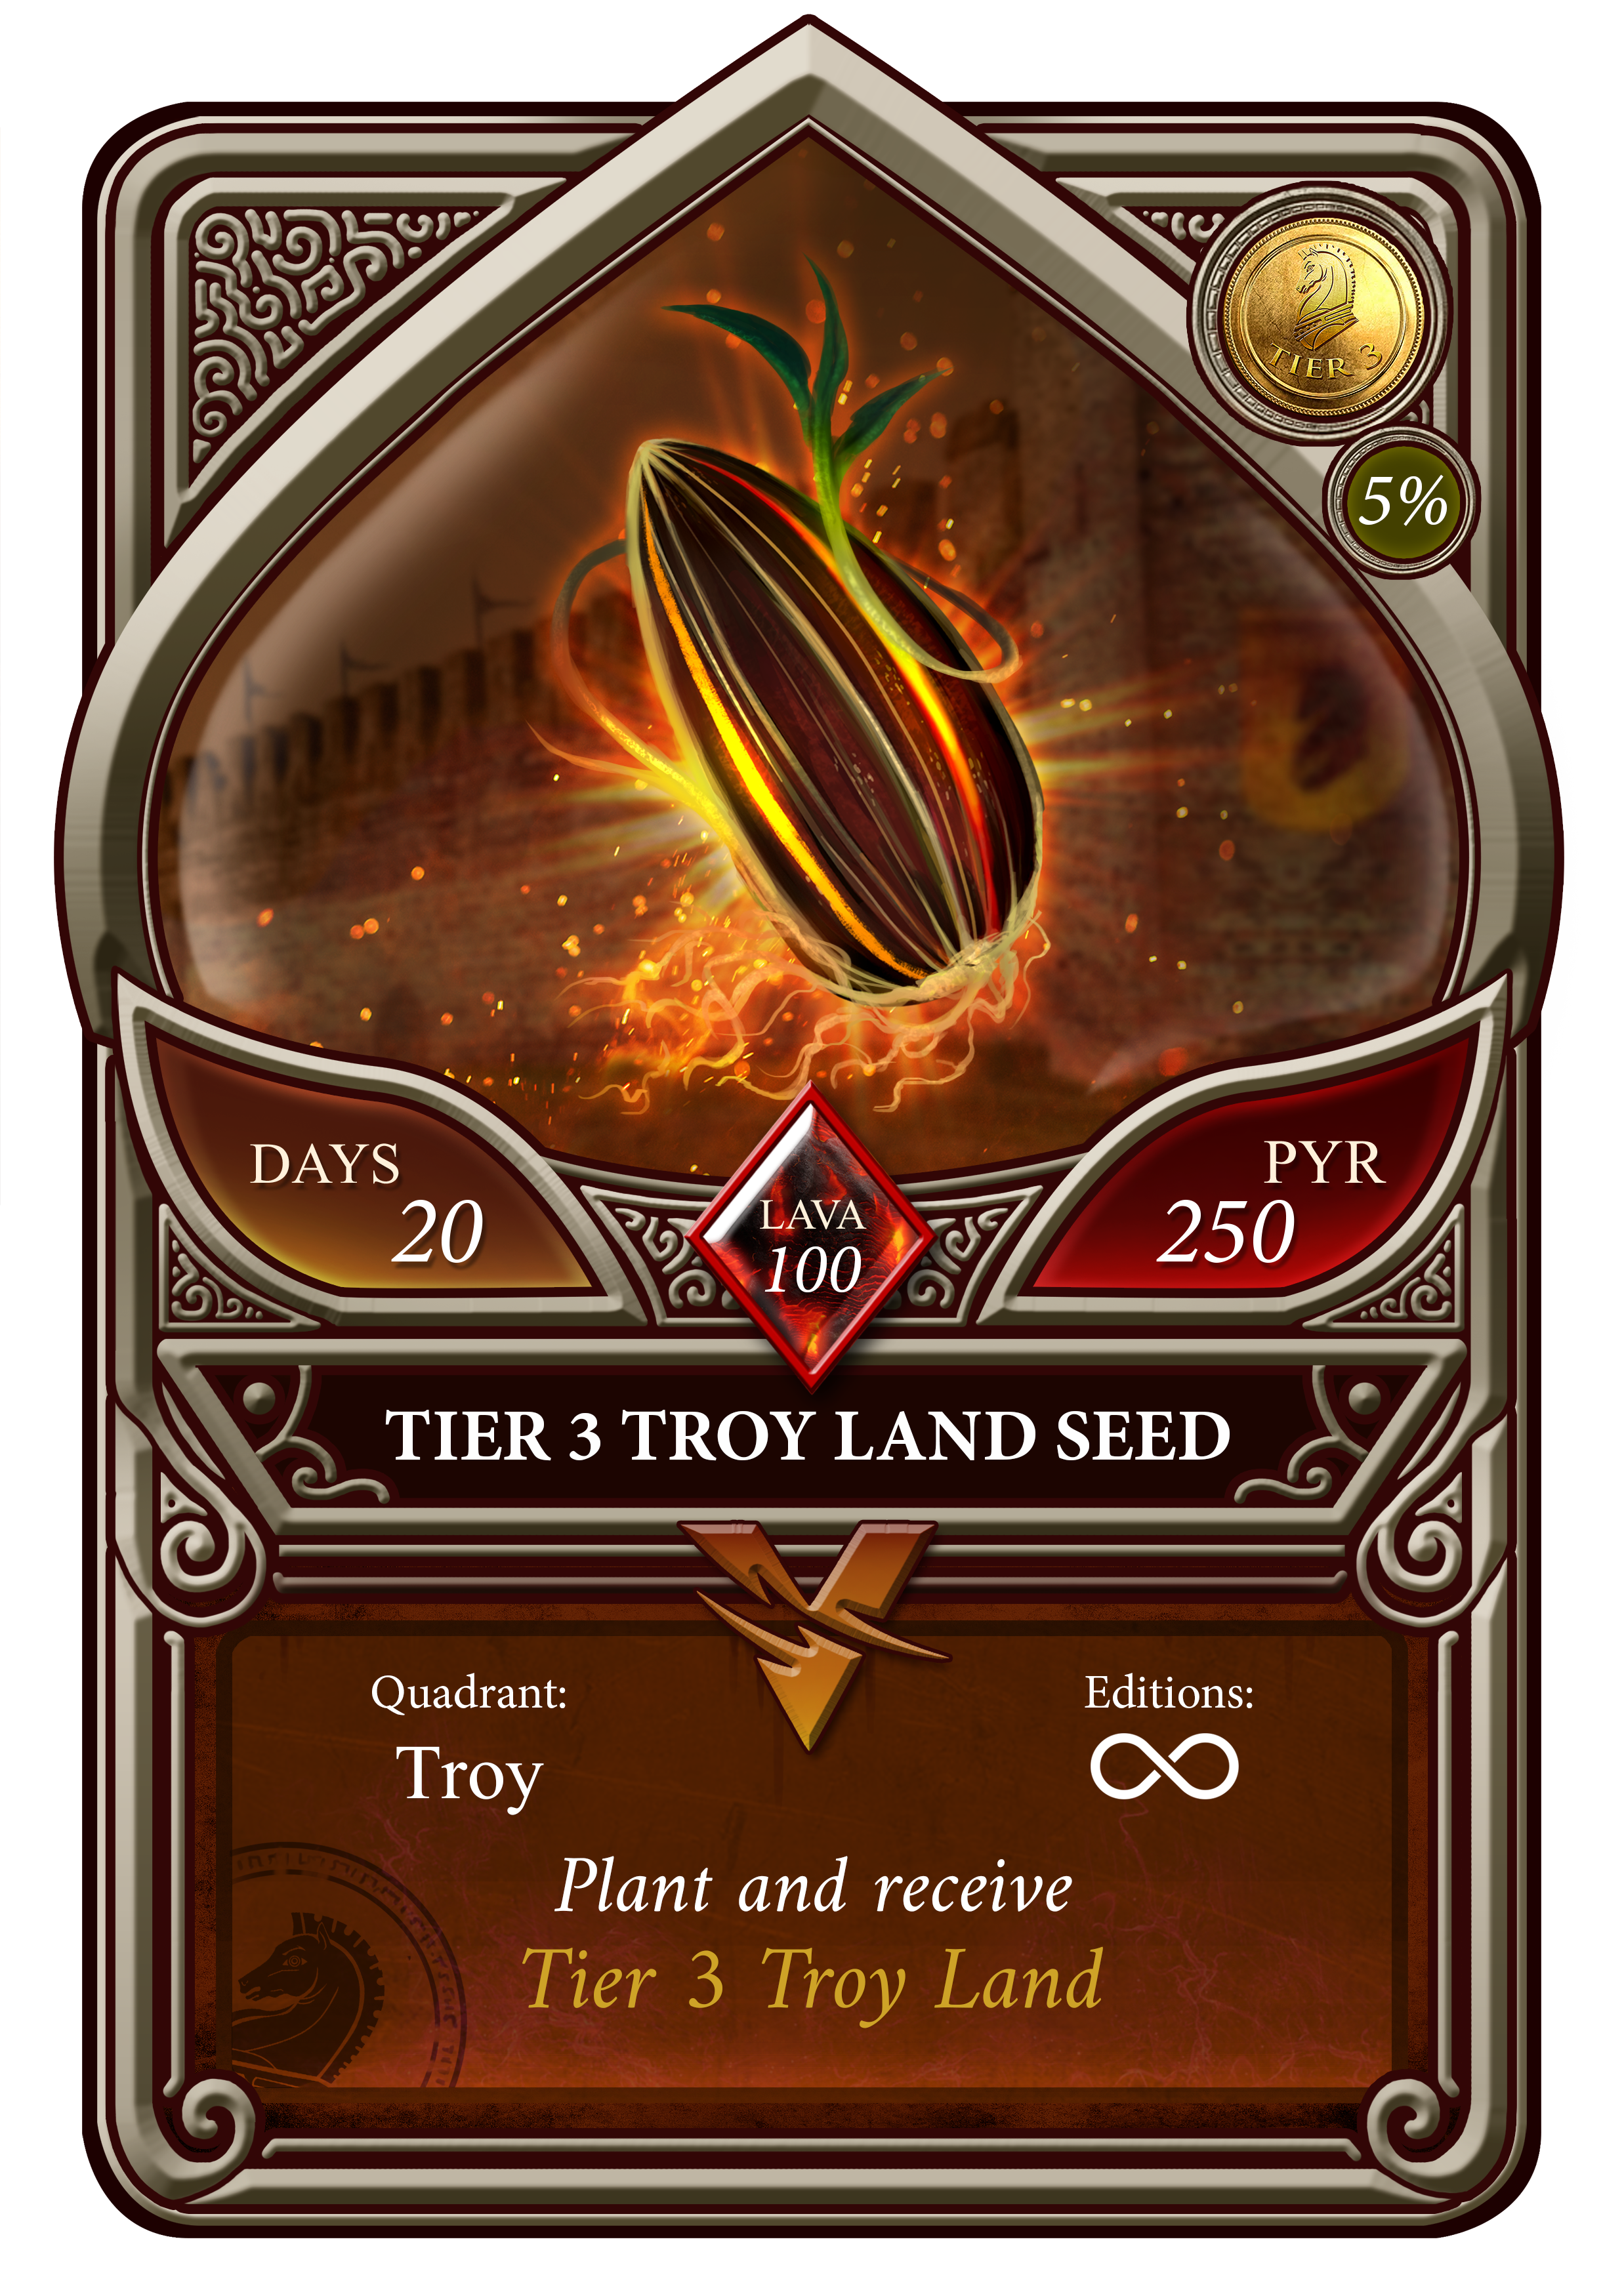 Tier 3 Troy Land Seed